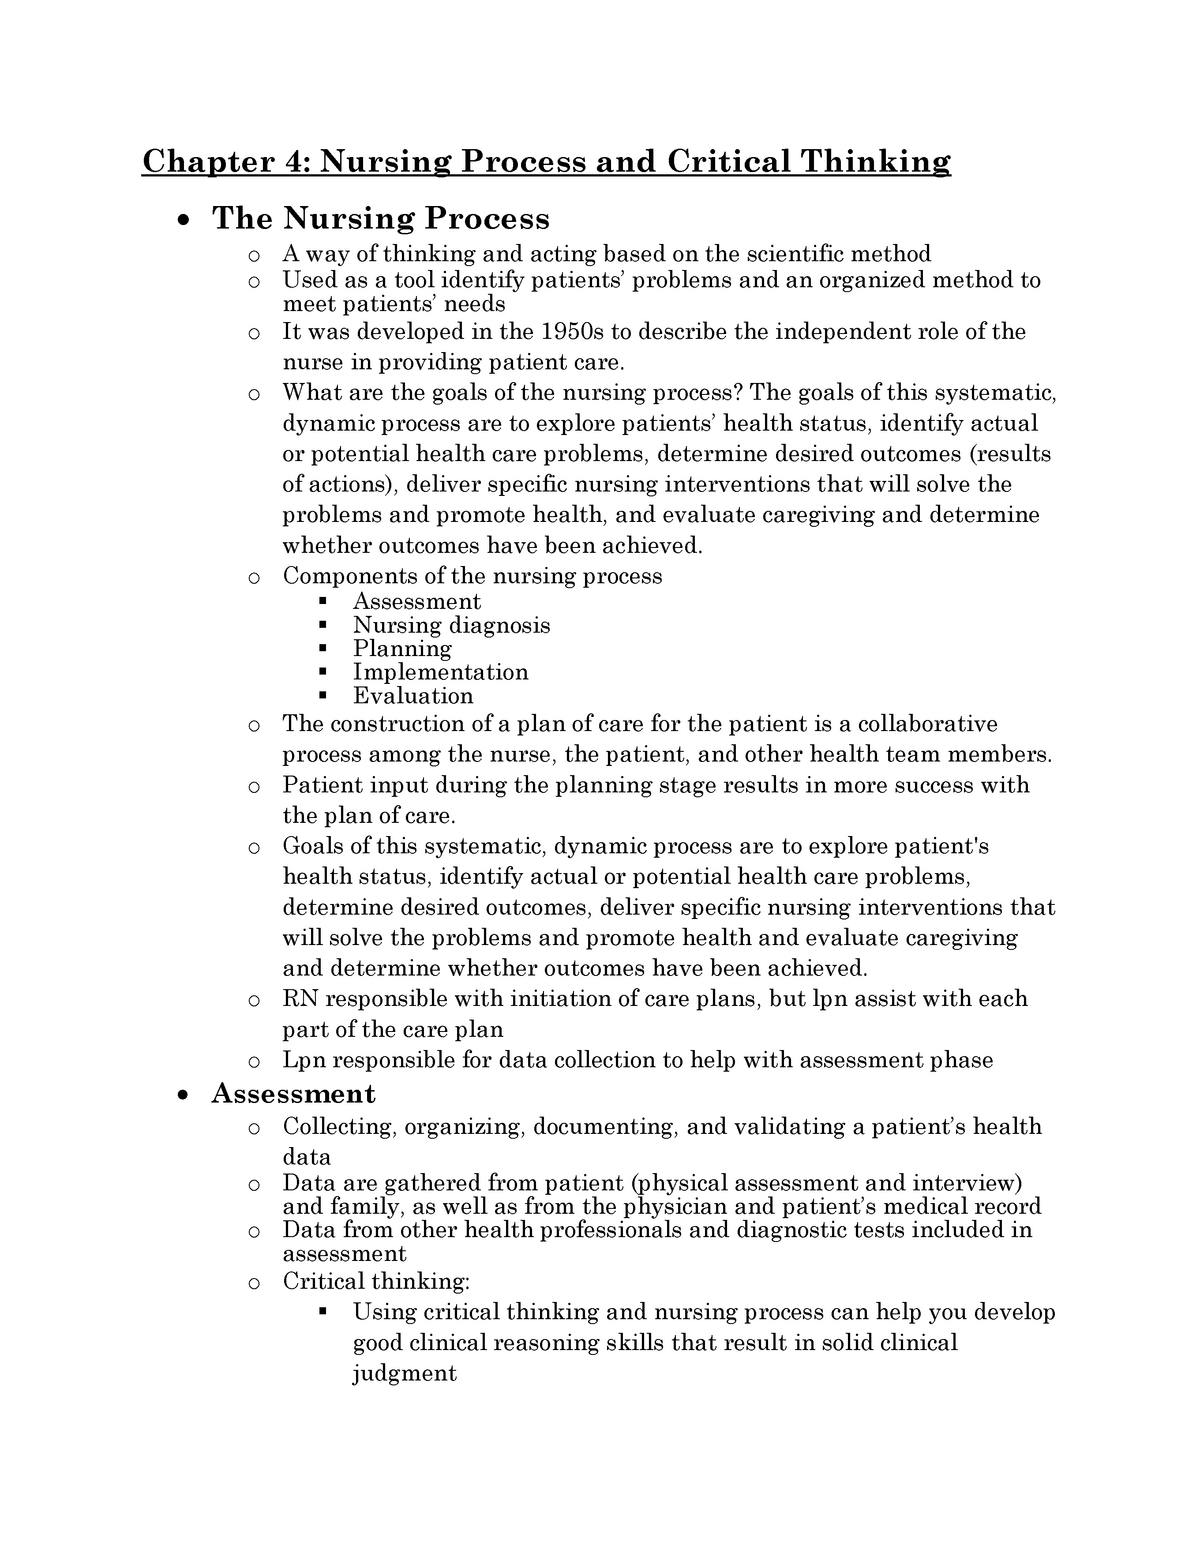 the nursing process and critical thinking chapter 4